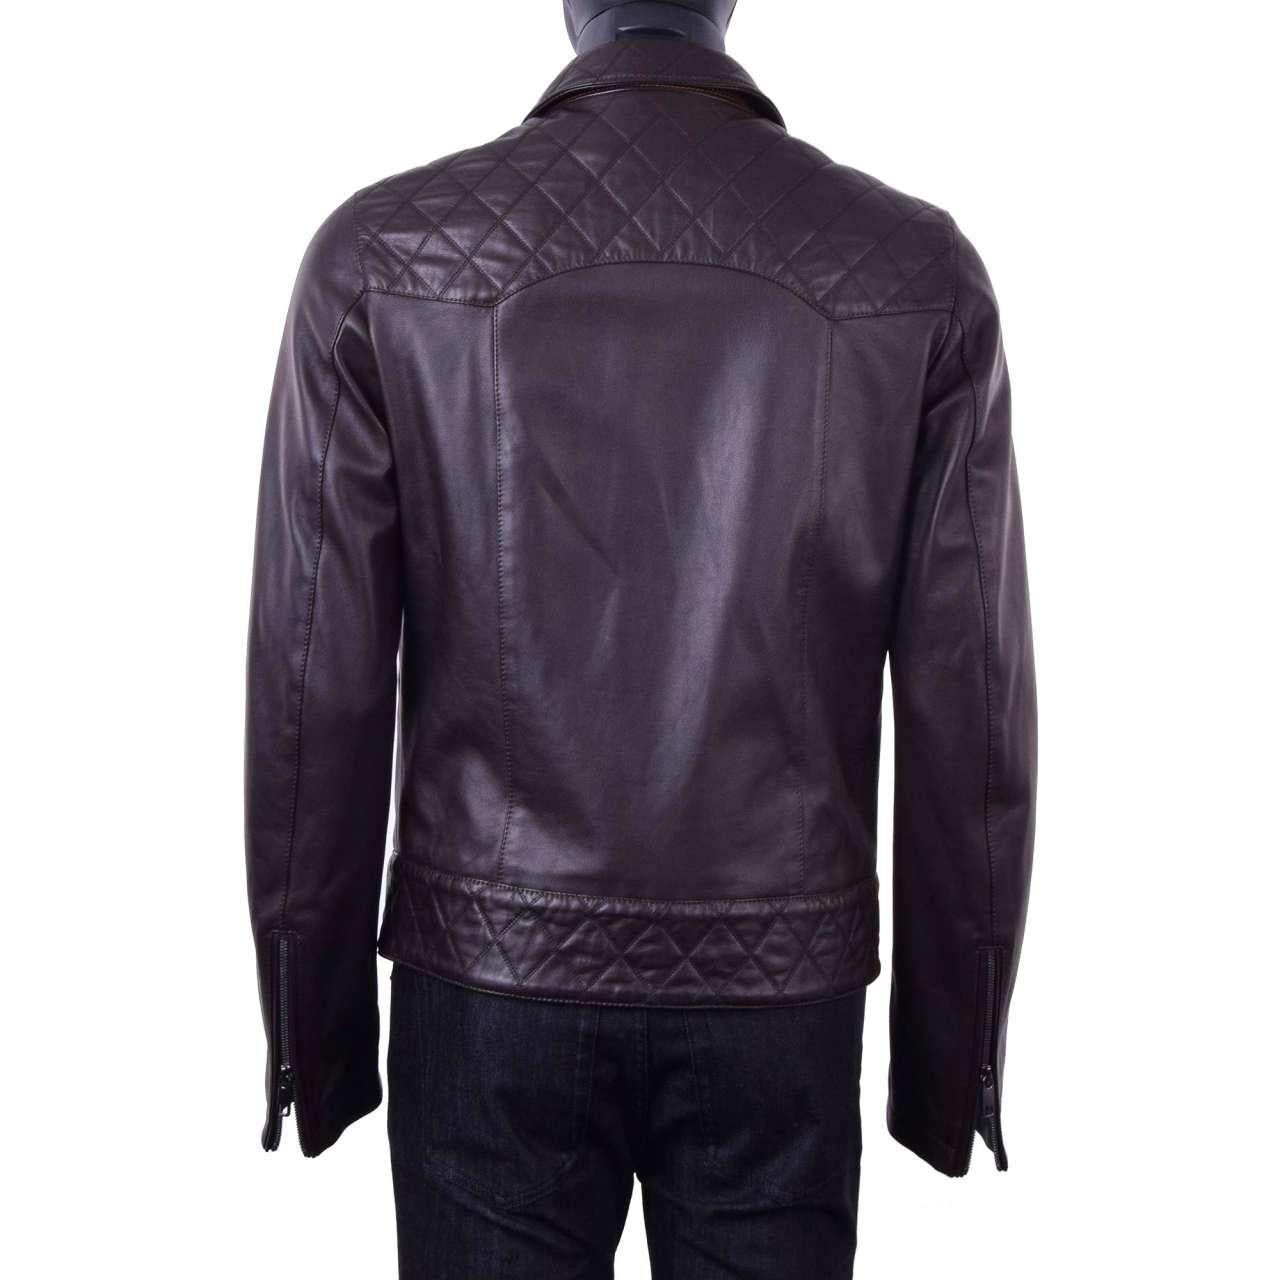 - Biker jacket made of partially quilted nappa lambskin by DOLCE & GABBANA Black Line - New with tag - MADE in ITALY - Slim Fit - Model: G9EX6L-FUL3B-M1348 - Material: 100% Lambskin - Lining: 88% Viscose, 10% Bullskin, 2% Calfskin - Color: Brown -